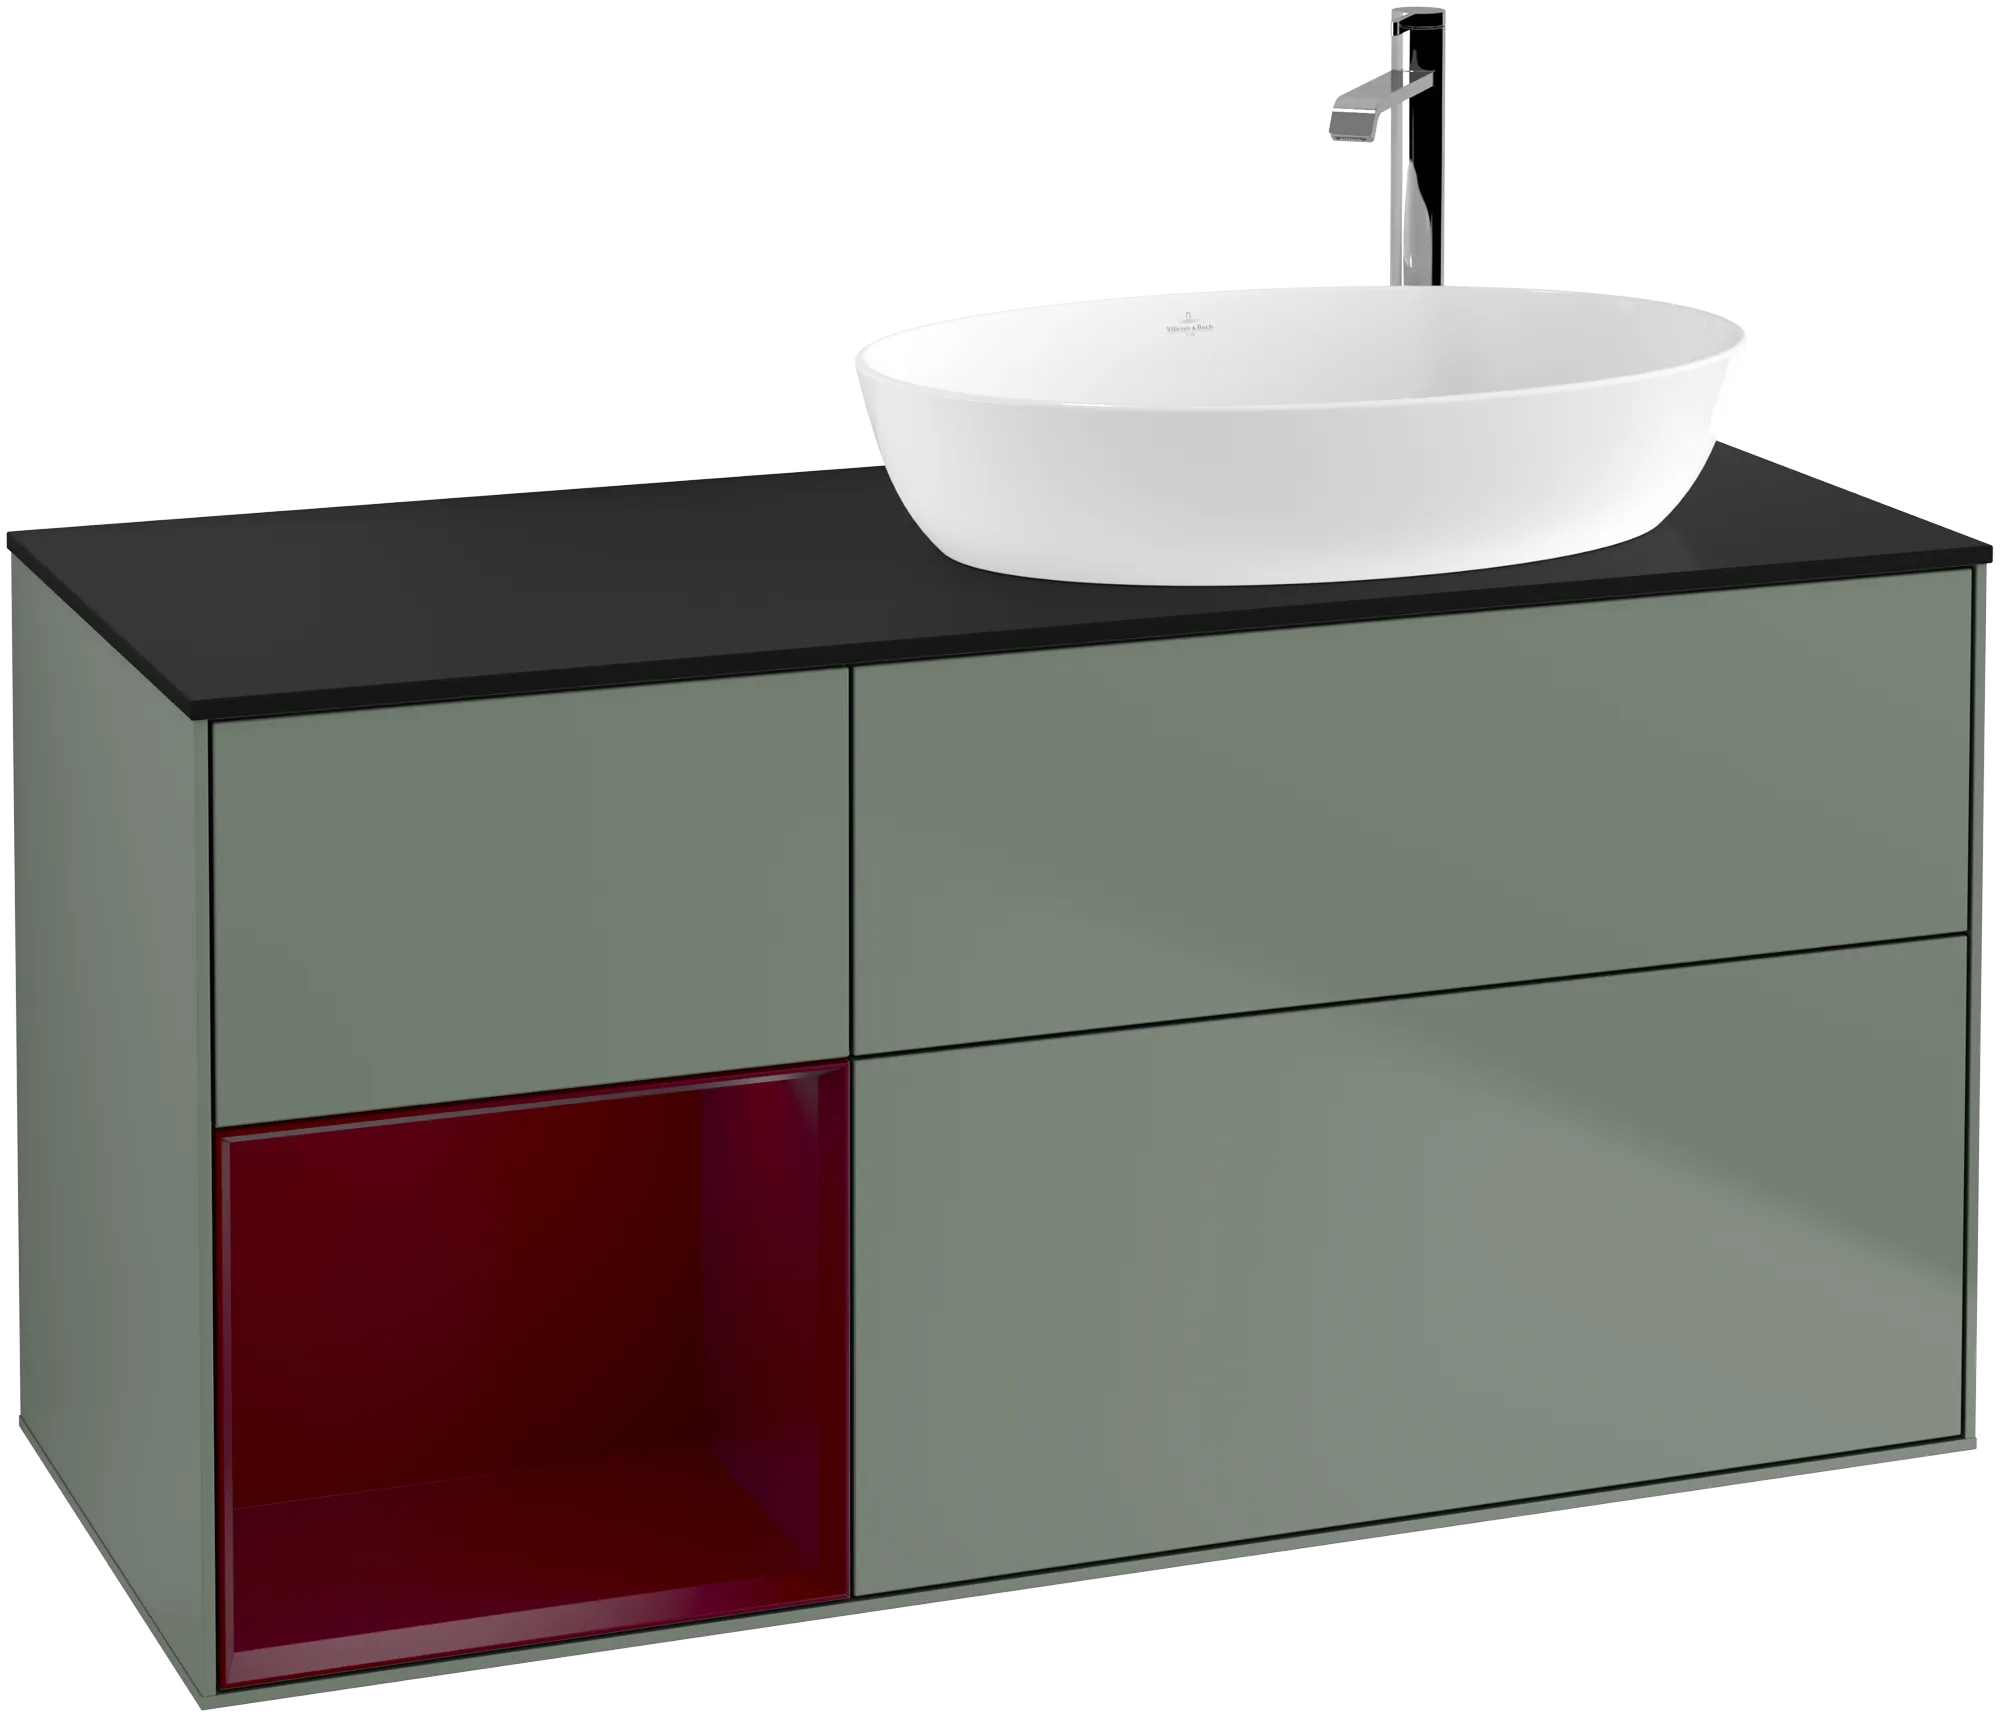 Picture of VILLEROY BOCH Finion Vanity unit, with lighting, 3 pull-out compartments, 1200 x 603 x 501 mm, Olive Matt Lacquer / Peony Matt Lacquer / Glass Black Matt #G922HBGM